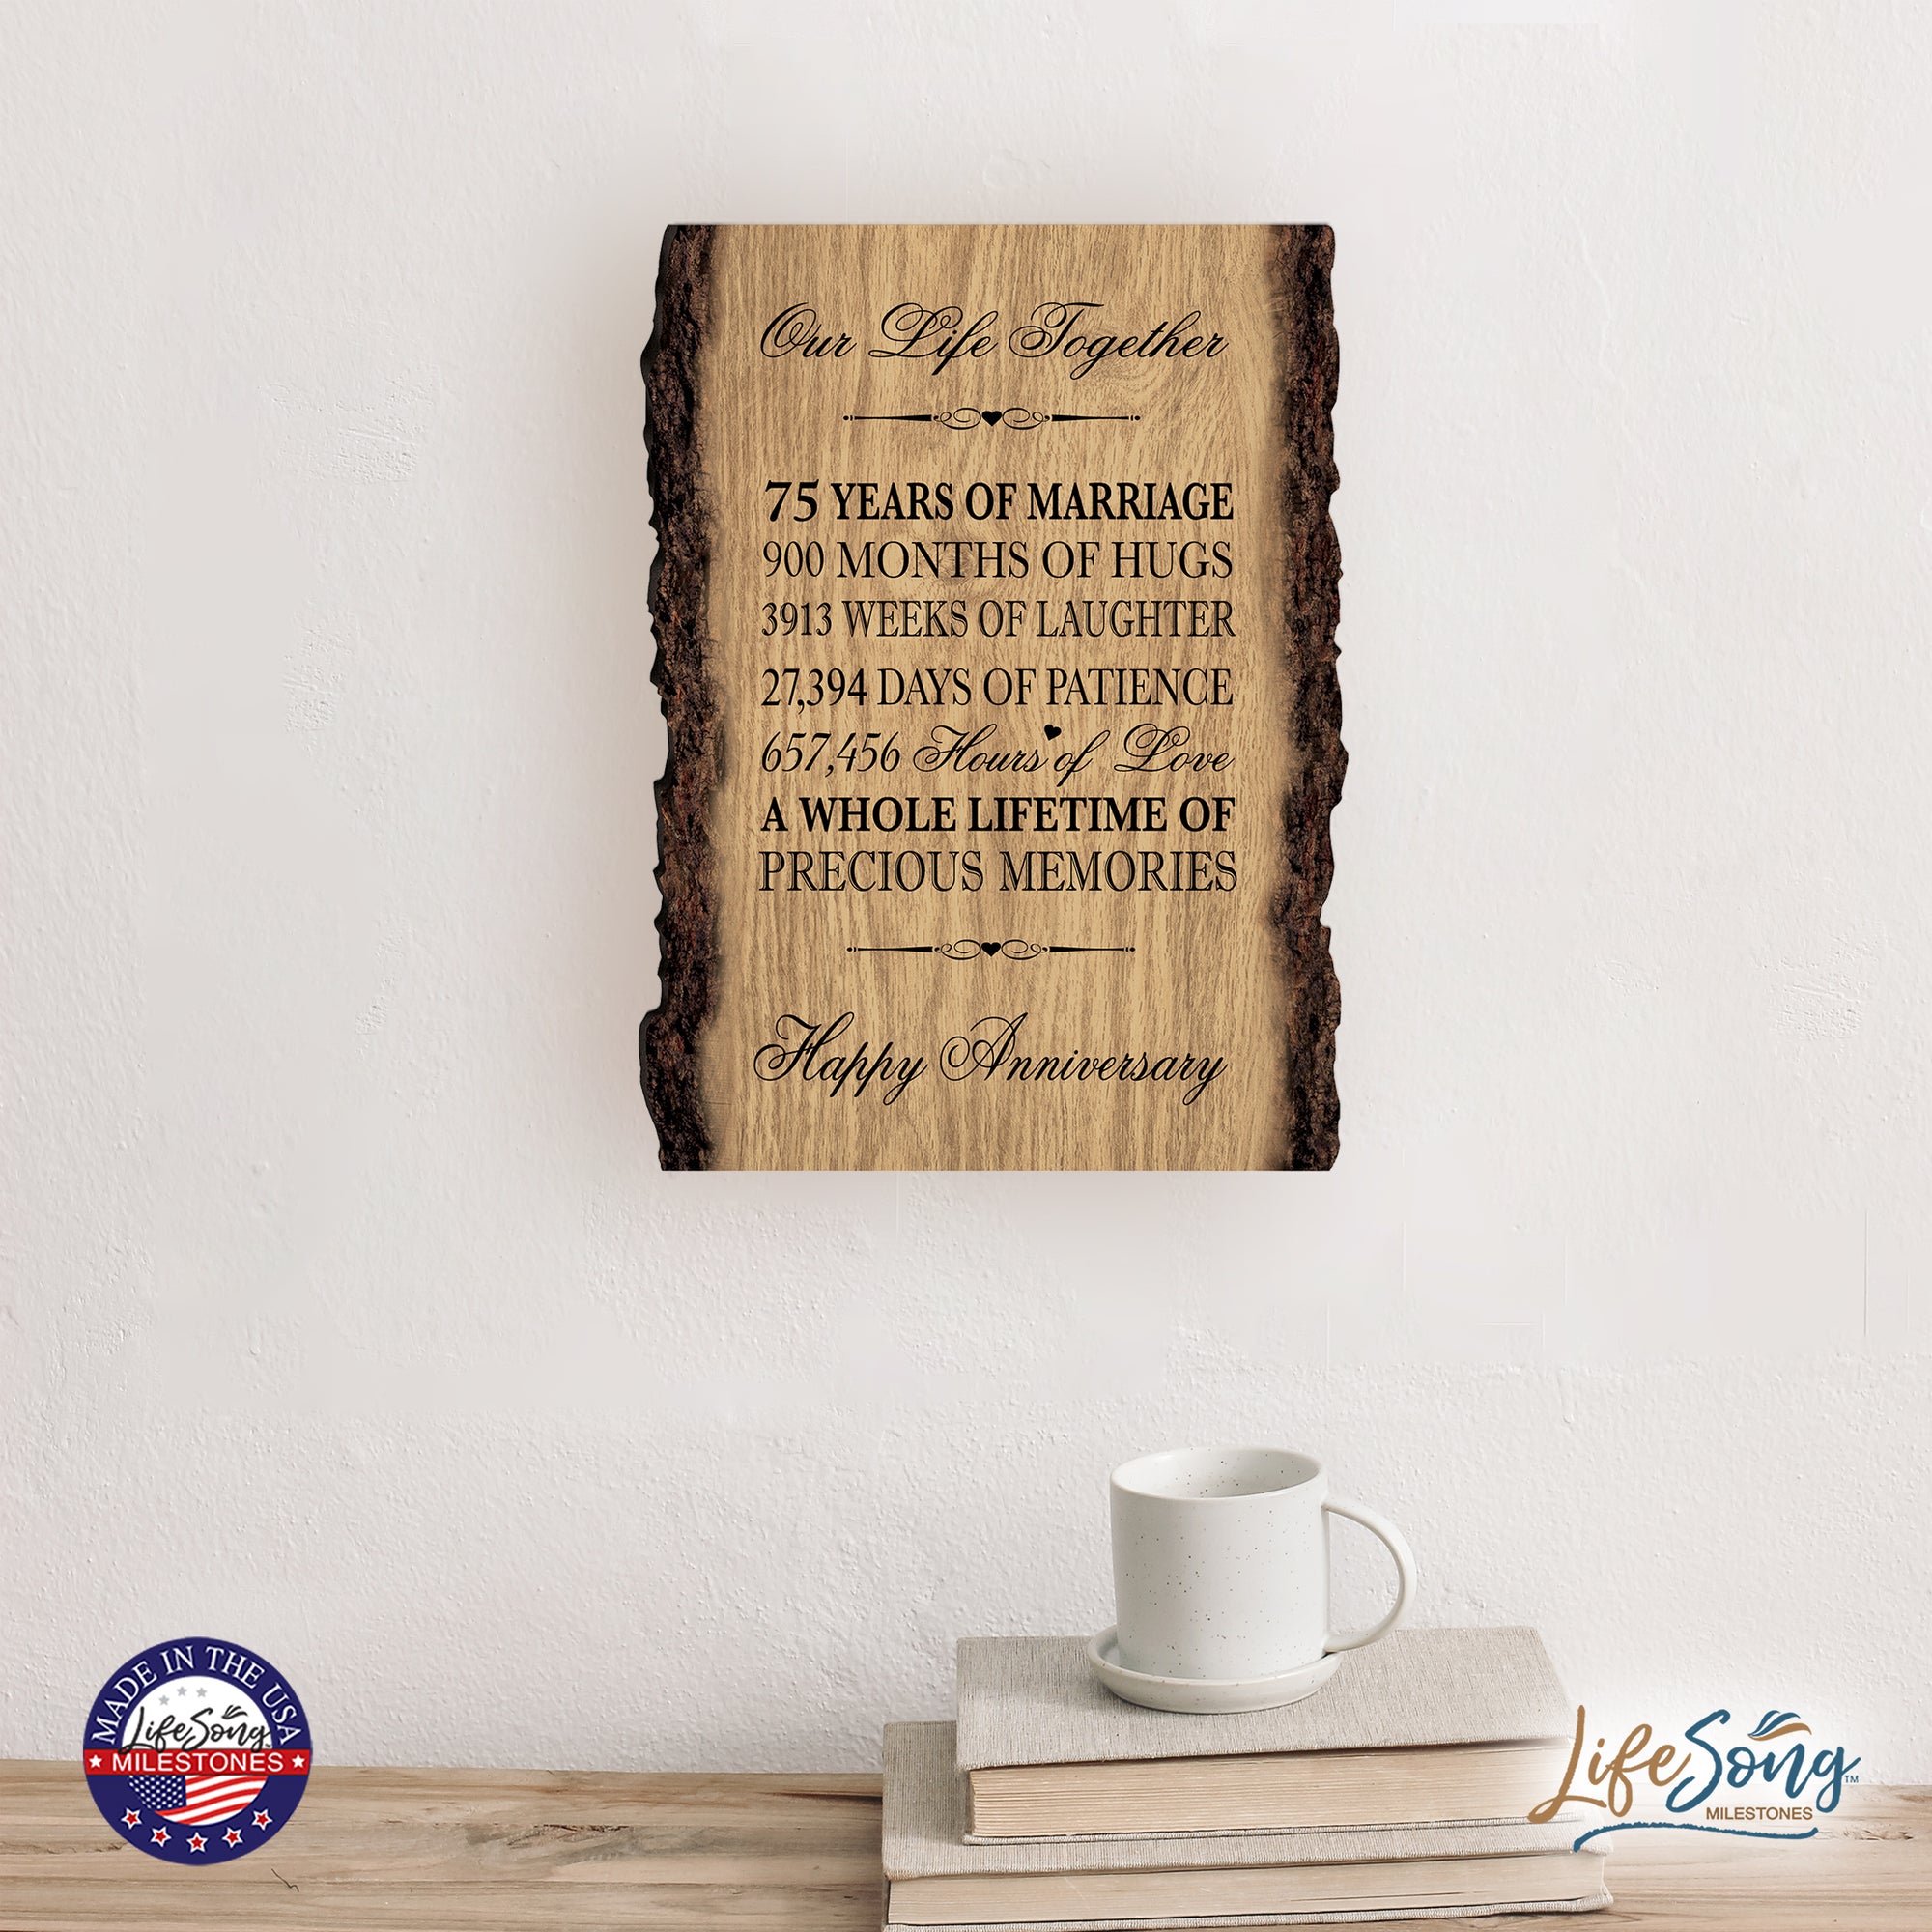 Rustic Wedding Anniversary 9x12 Barky Wall Plaque Gift For Parents, Grandparents New Couple - 75 Years Of Marriage